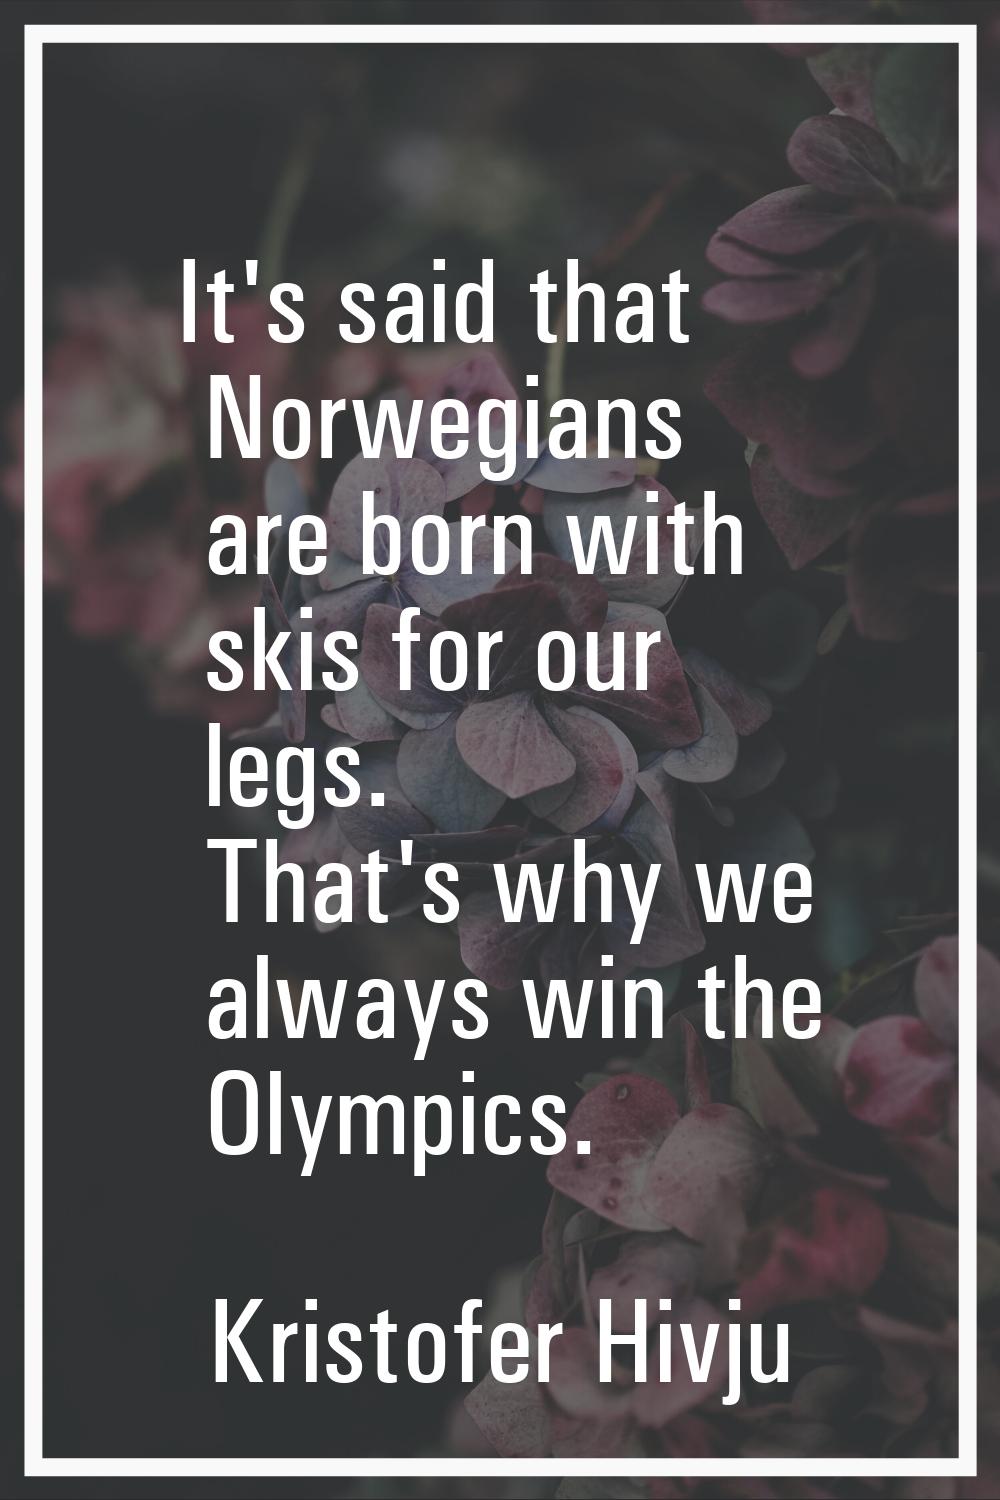 It's said that Norwegians are born with skis for our legs. That's why we always win the Olympics.